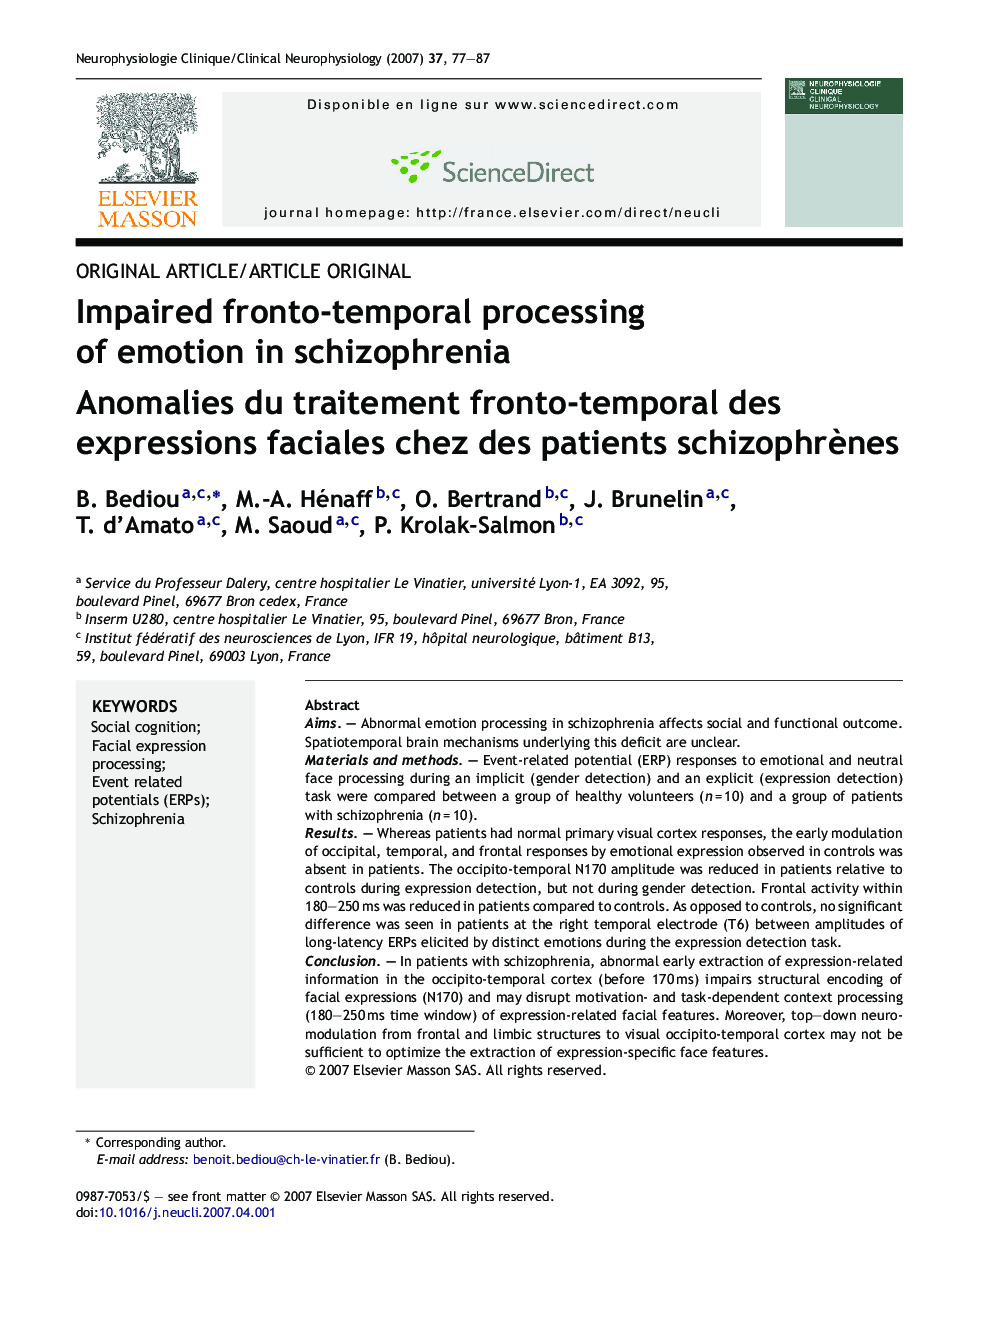 Impaired fronto-temporal processing of emotion in schizophrenia